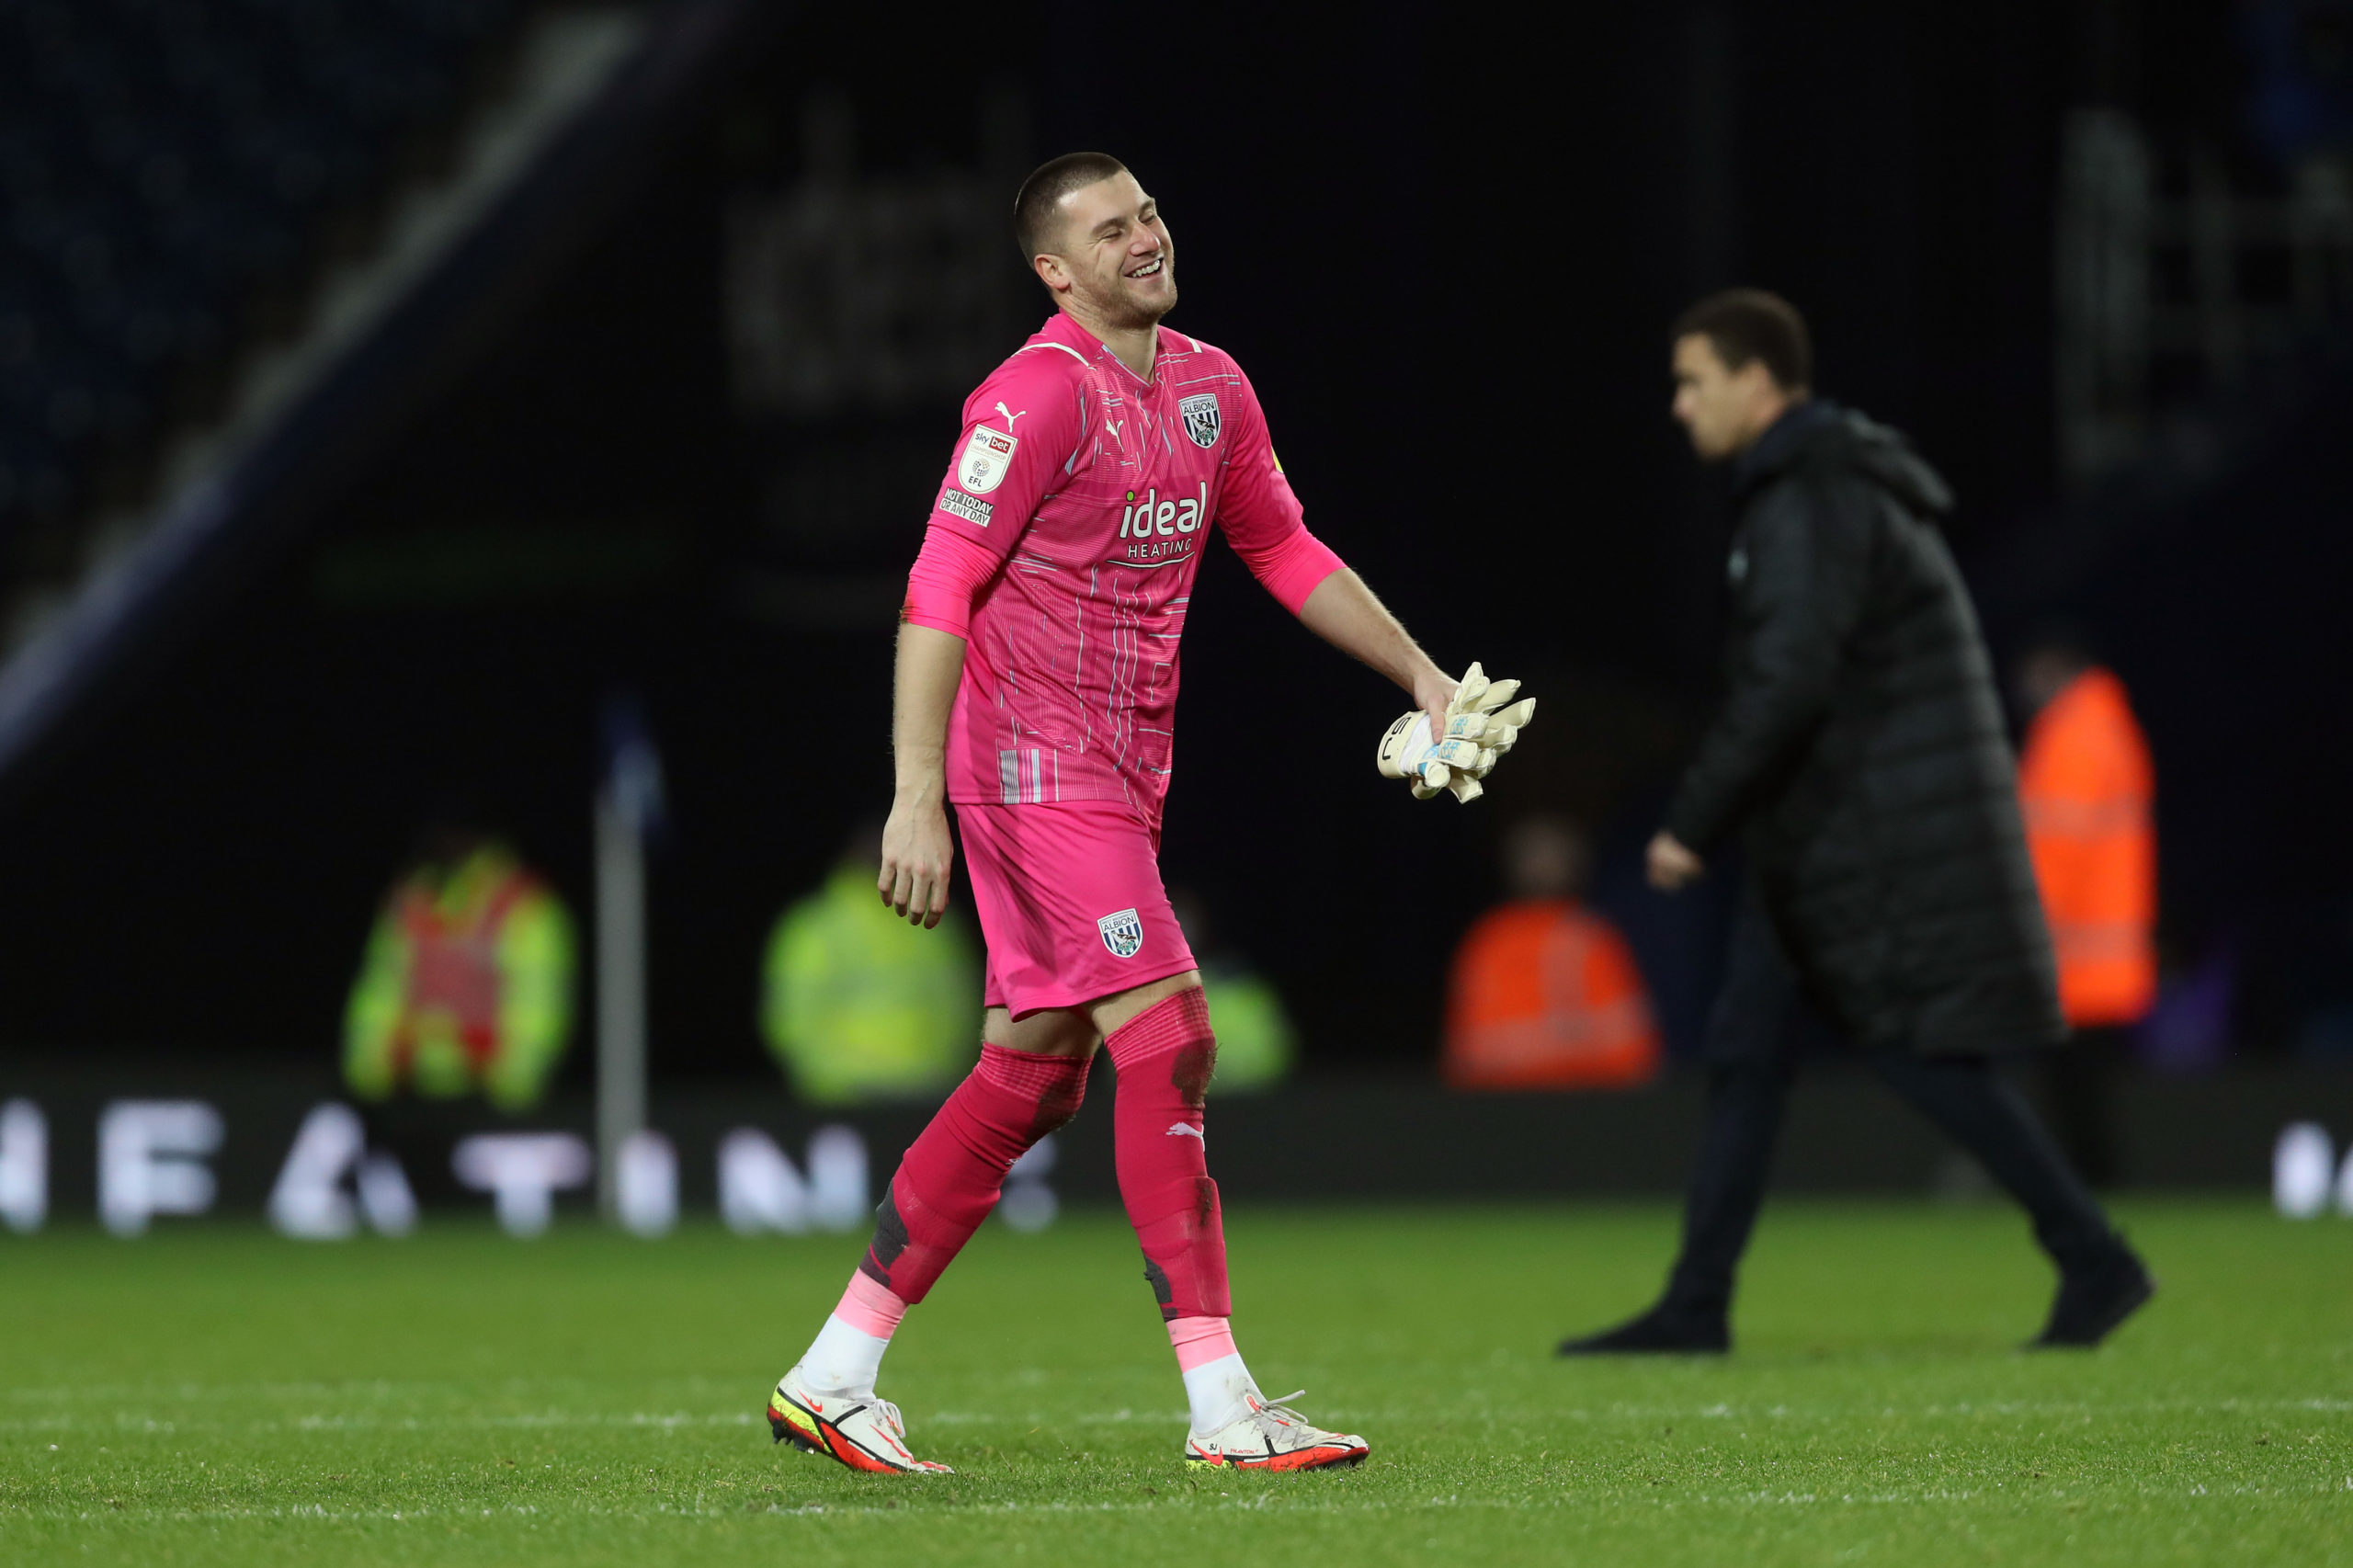 West Ham are allegedly eyeing a January transfer window move to sign Sam Johnstone from West Brom